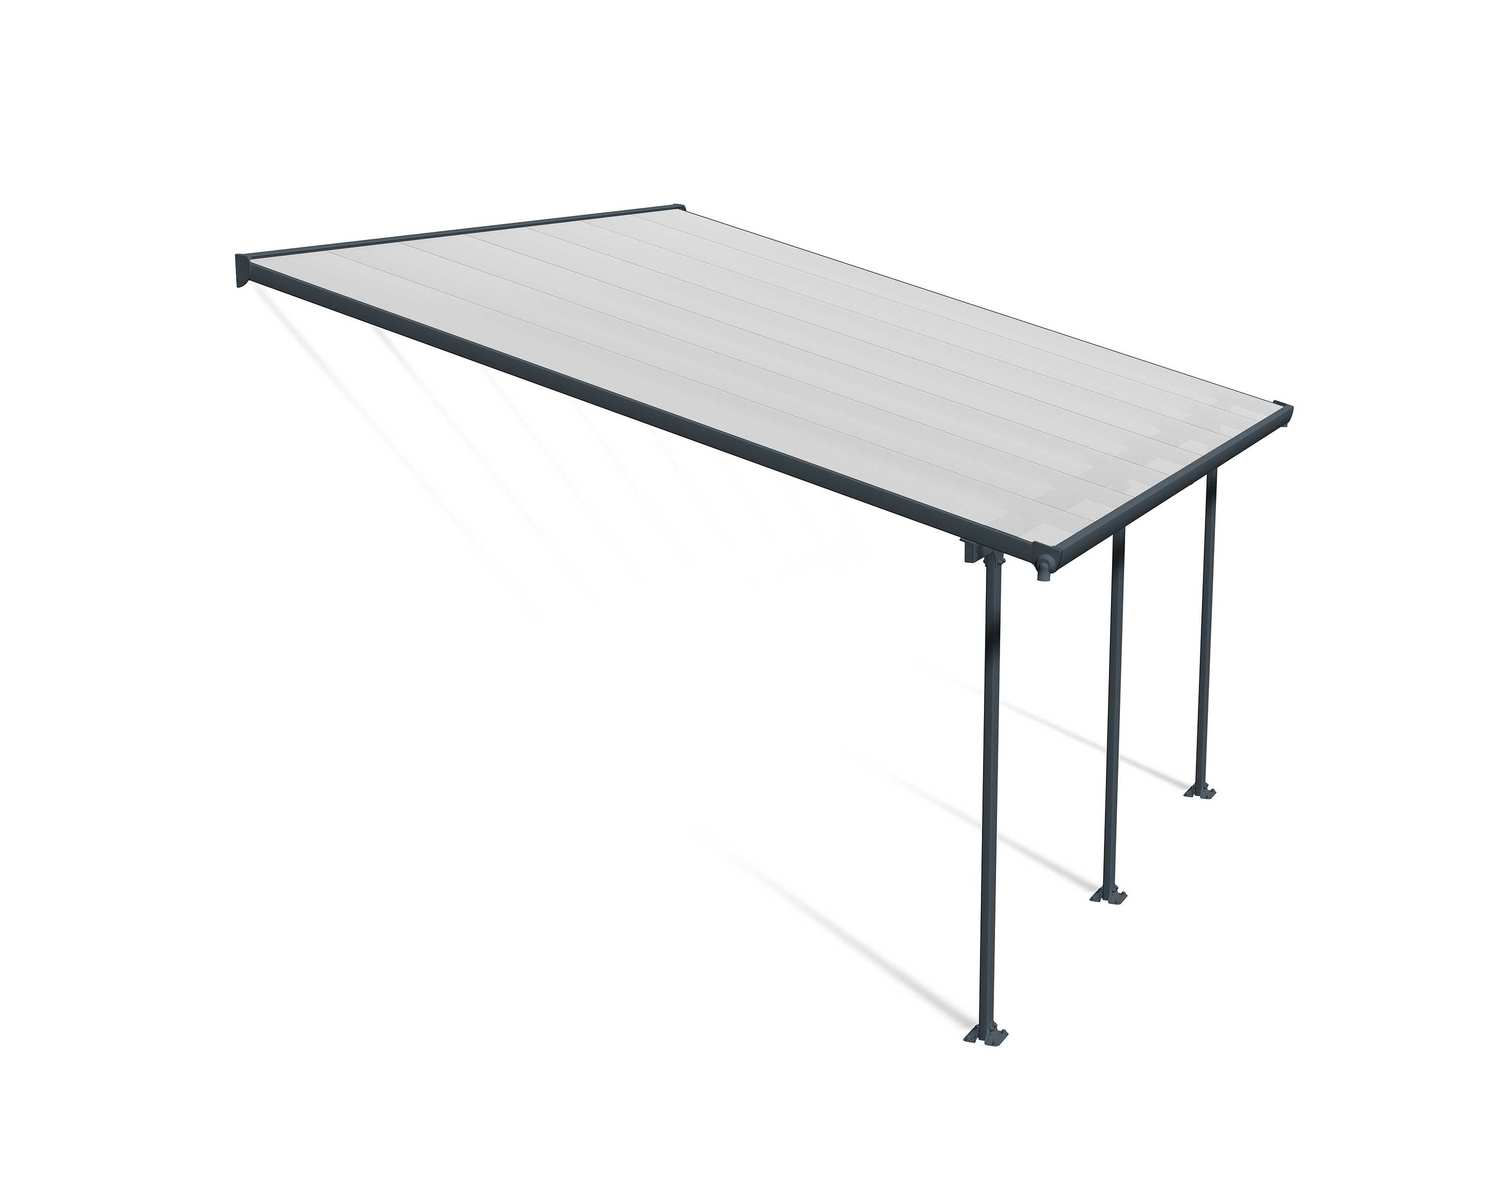 Feria 13 ft. x 14 ft. Grey Aluminium Patio Cover With 3 Posts, Clear Twin-Wall Polycarbonate Roof Panels.